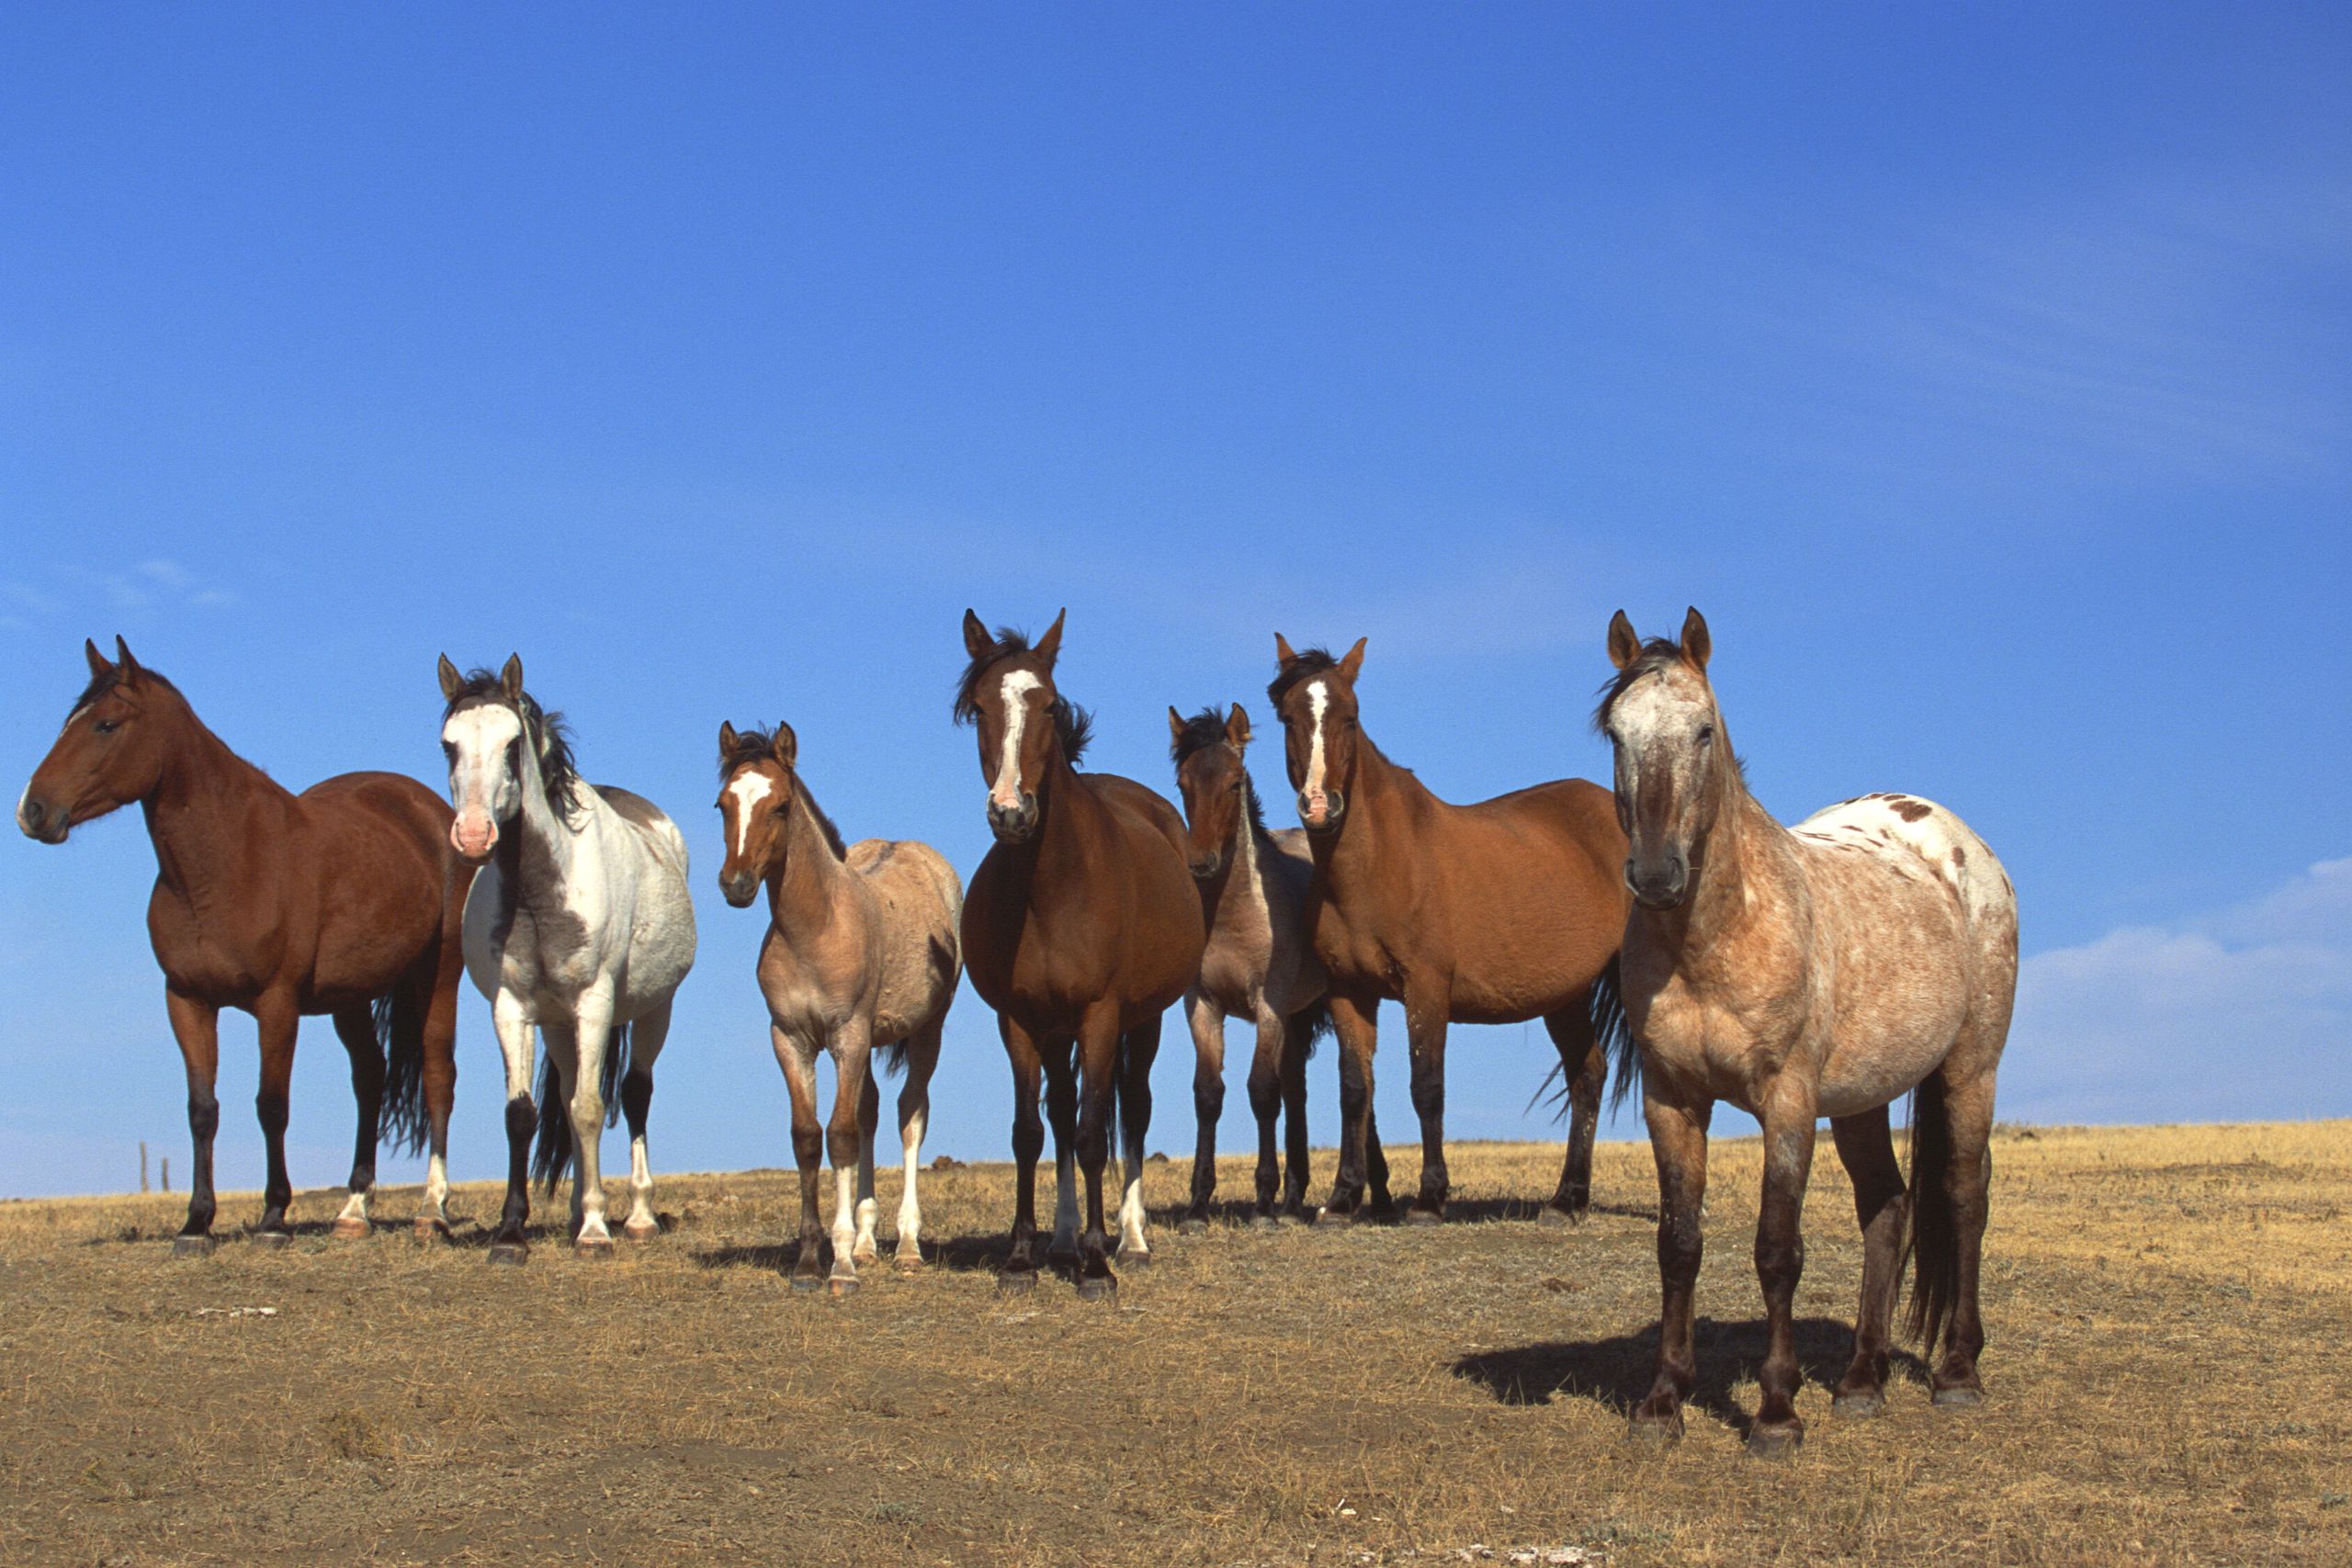 Spanish Mustang: Six horses on a hill